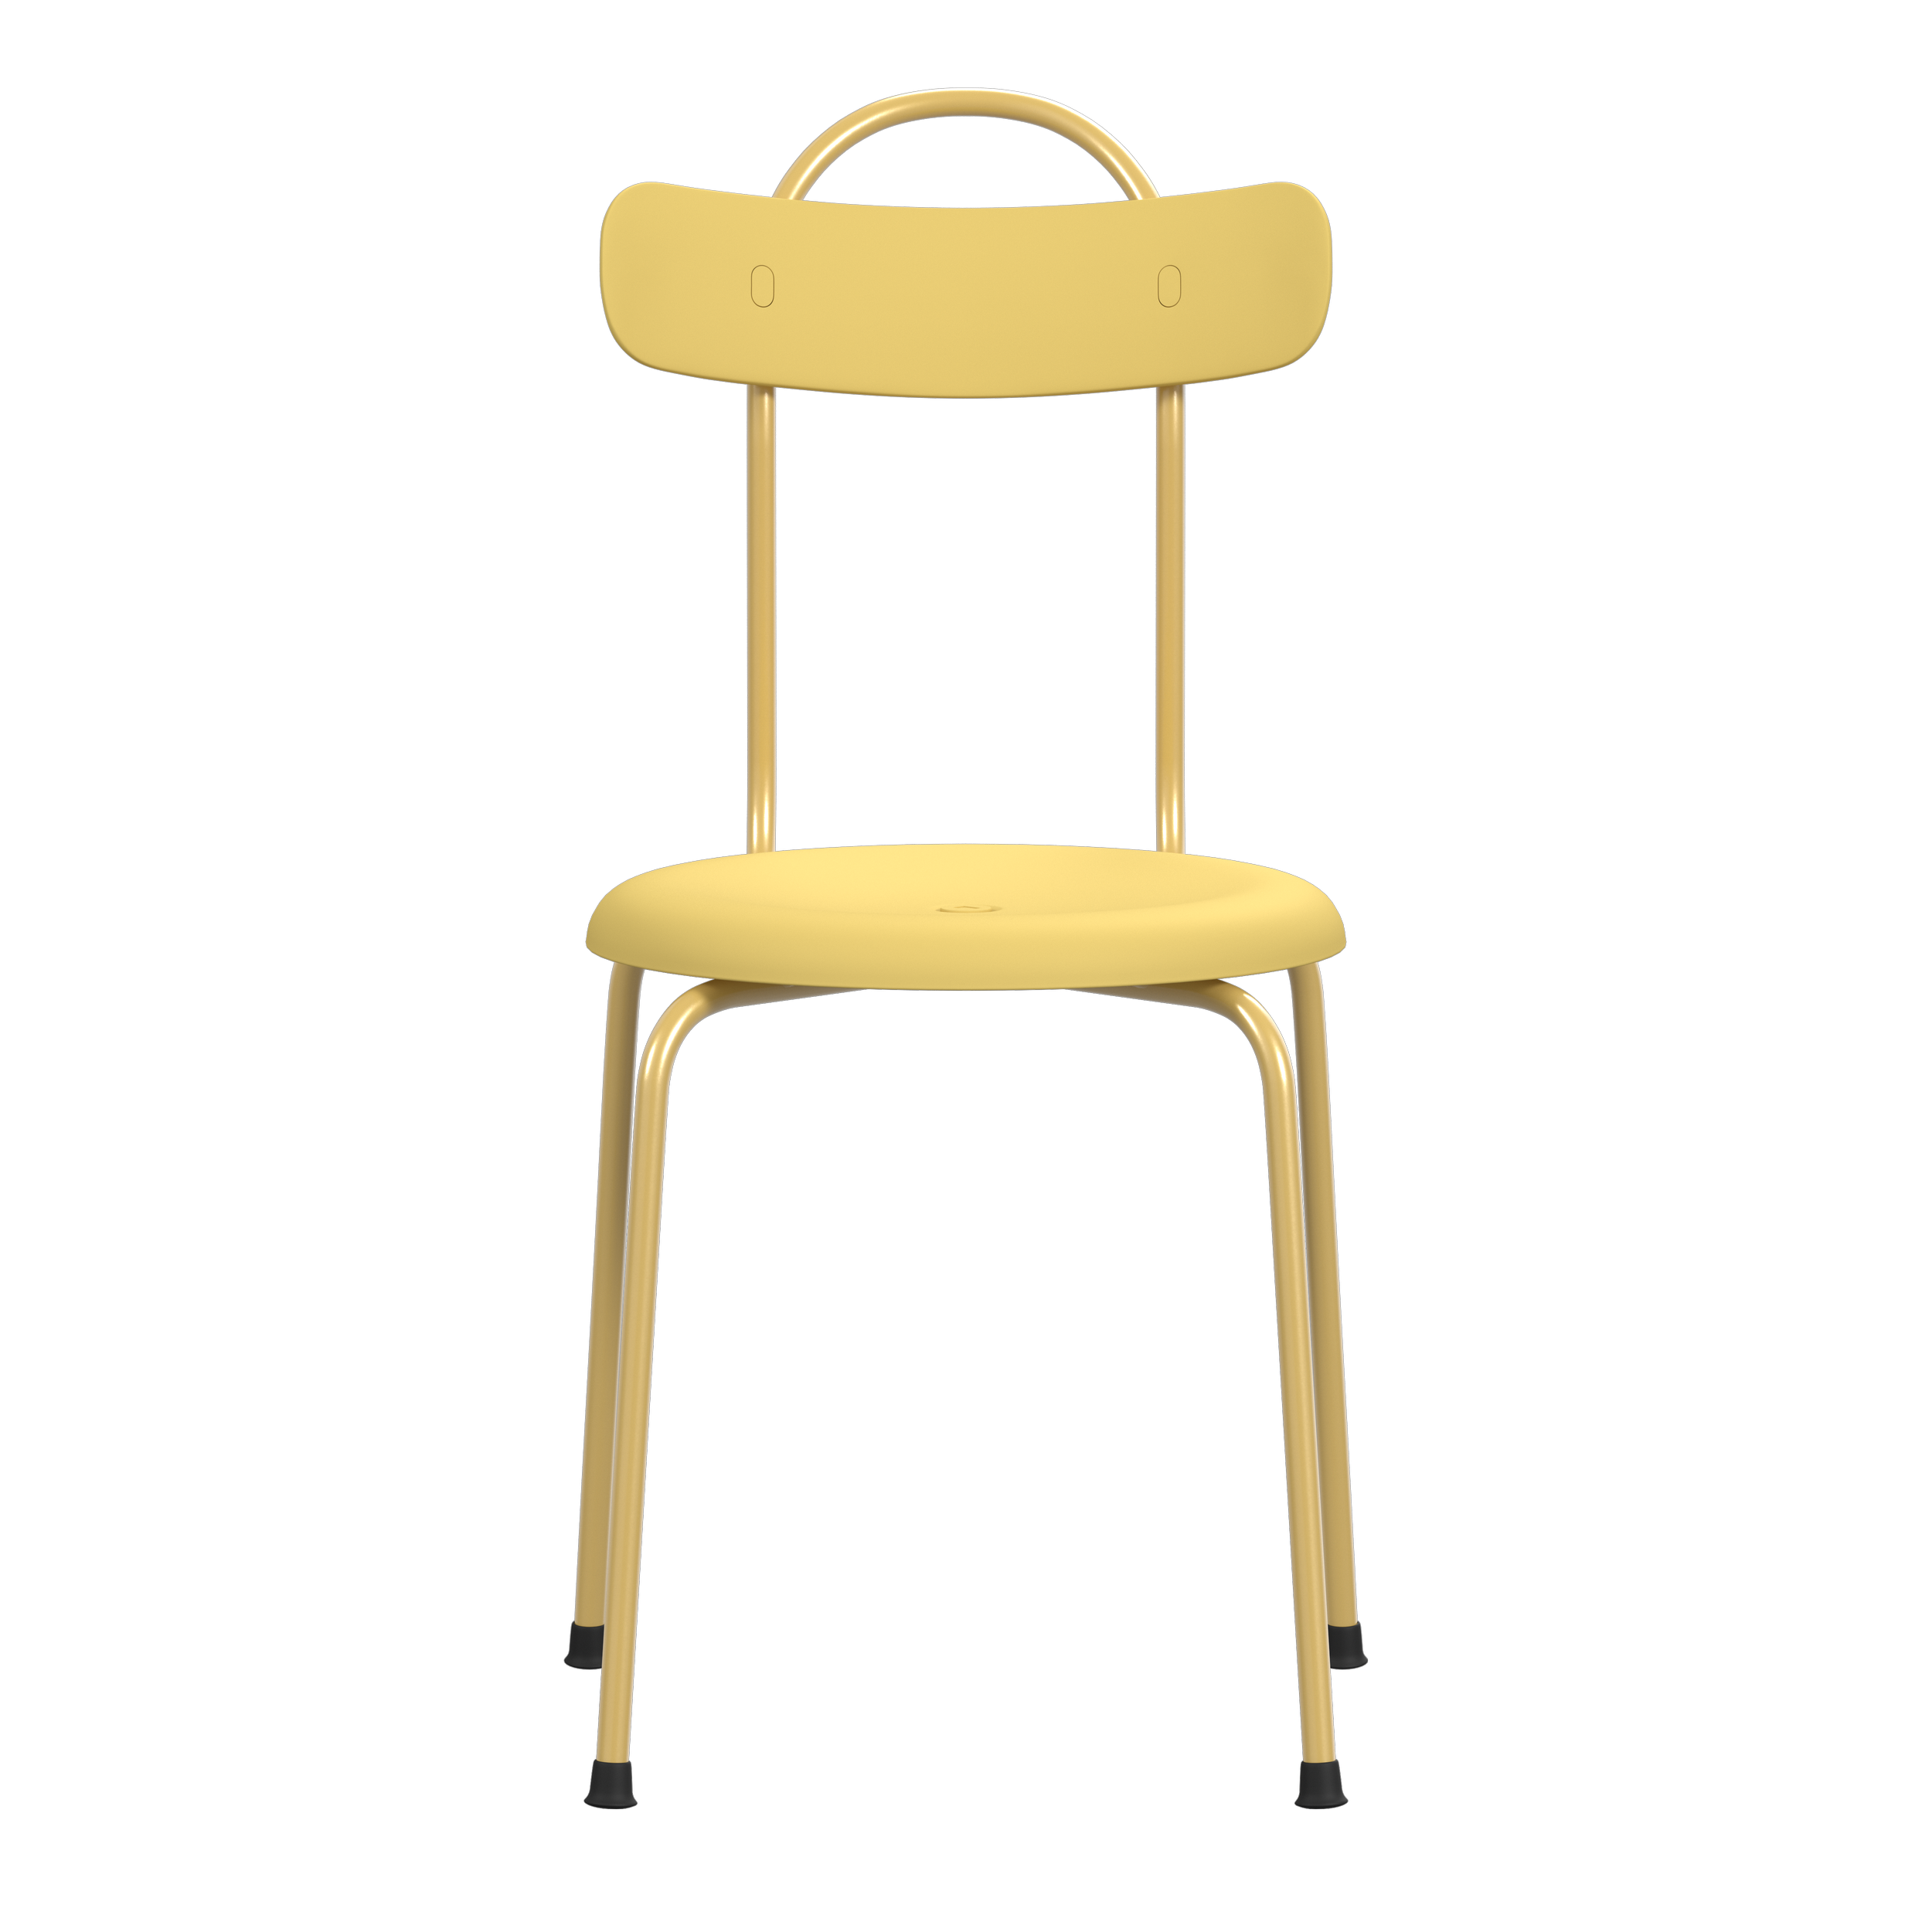 Lammhults_TaburettPlus_chair_yellow_yellow_front.png